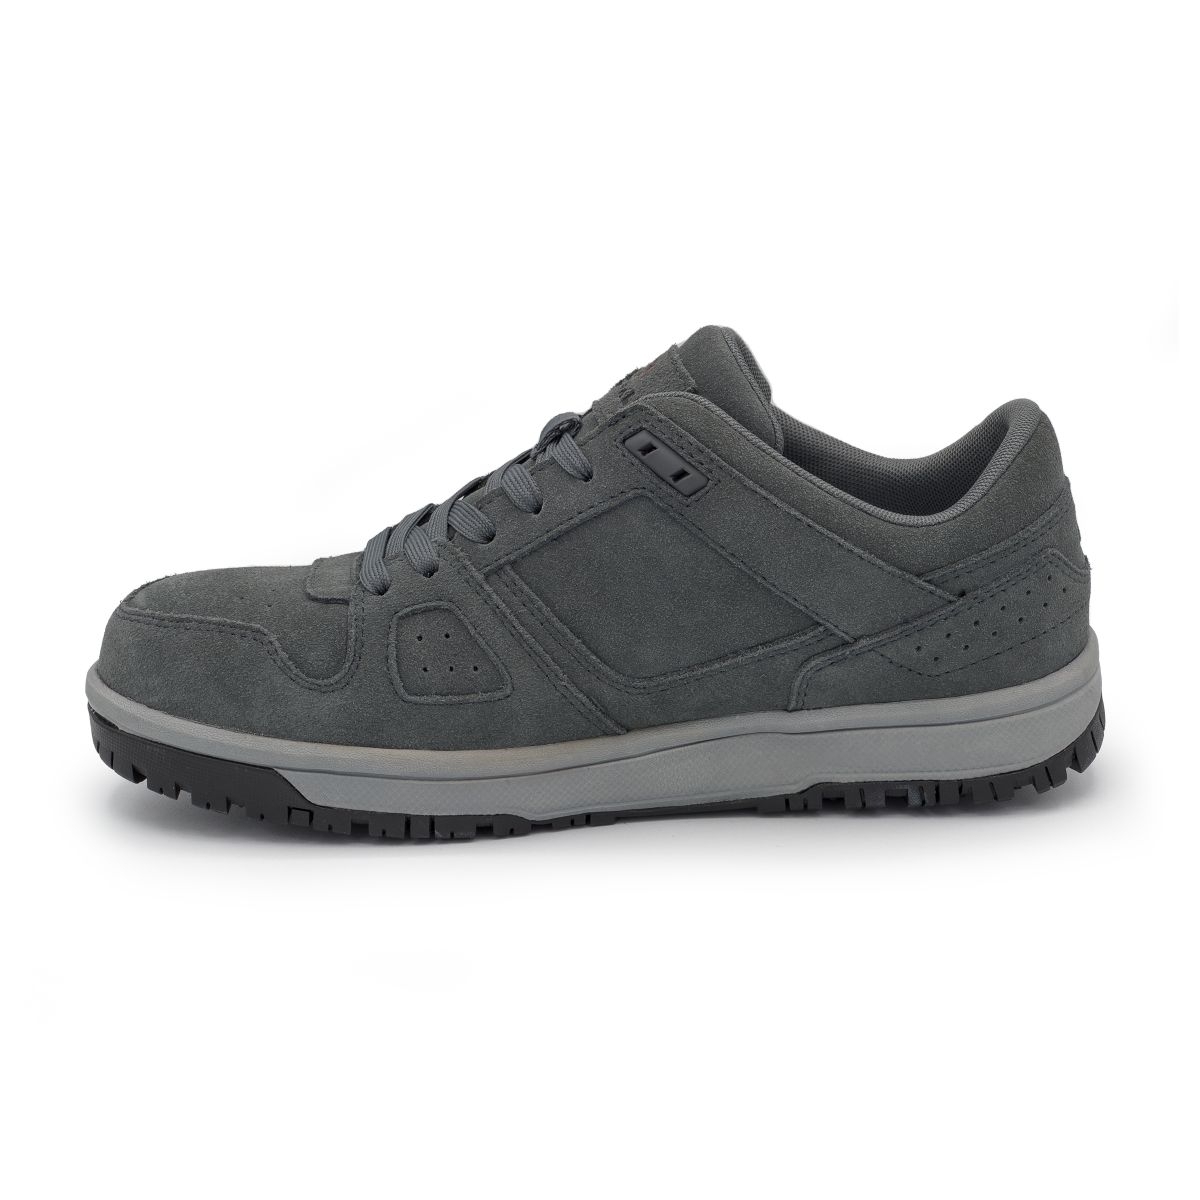 AIRWALK SAFETY Men's Mongo Composite Toe EH Work Shoe Charcoal/Grey - AW6301 CHARCOAL/GRAY - CHARCOAL/GRAY, 11-W